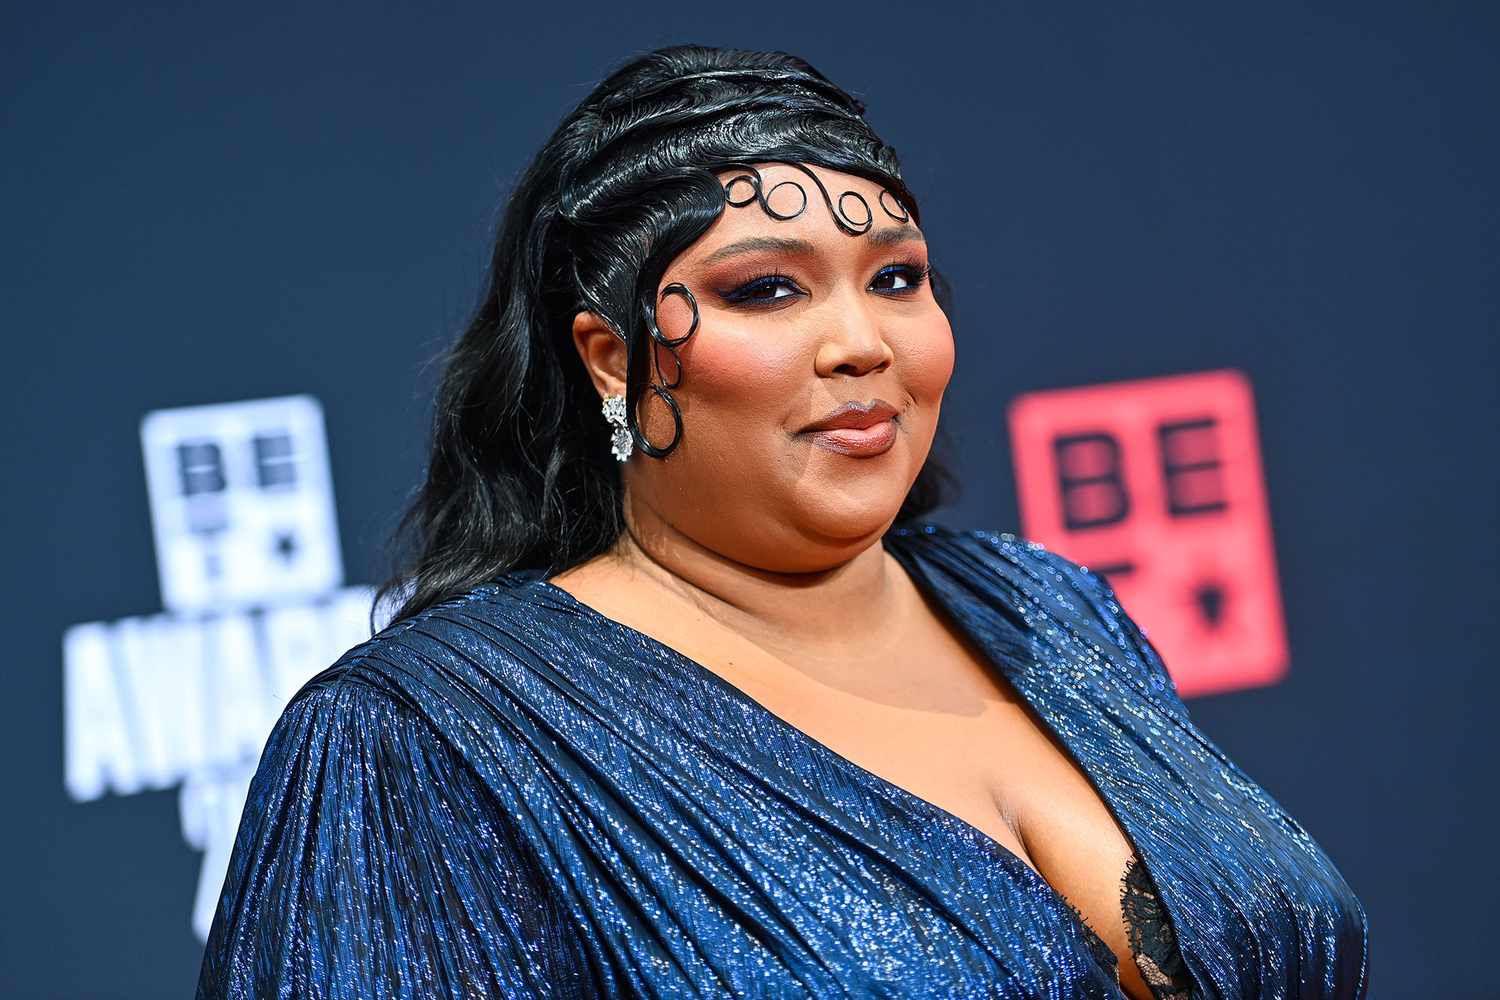 Lizzo Denies Turning Down Cameo For Jennifer Lopez Movie, Claims She Wasn't Asked